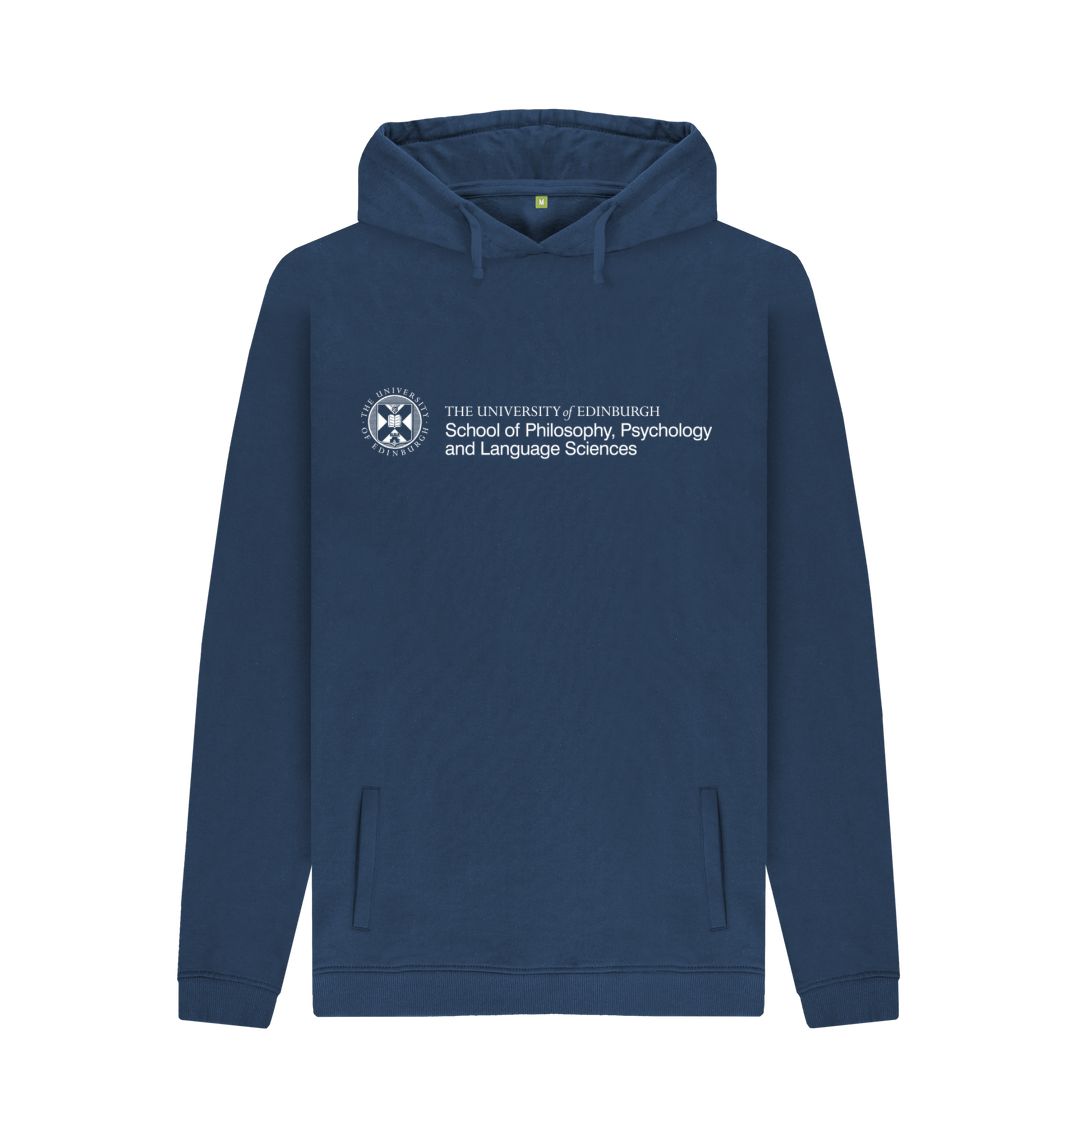 Navy hoodie with white University crest and text that reads ' University of Edinburgh School of Philosophy, Psychology and Language Sciences